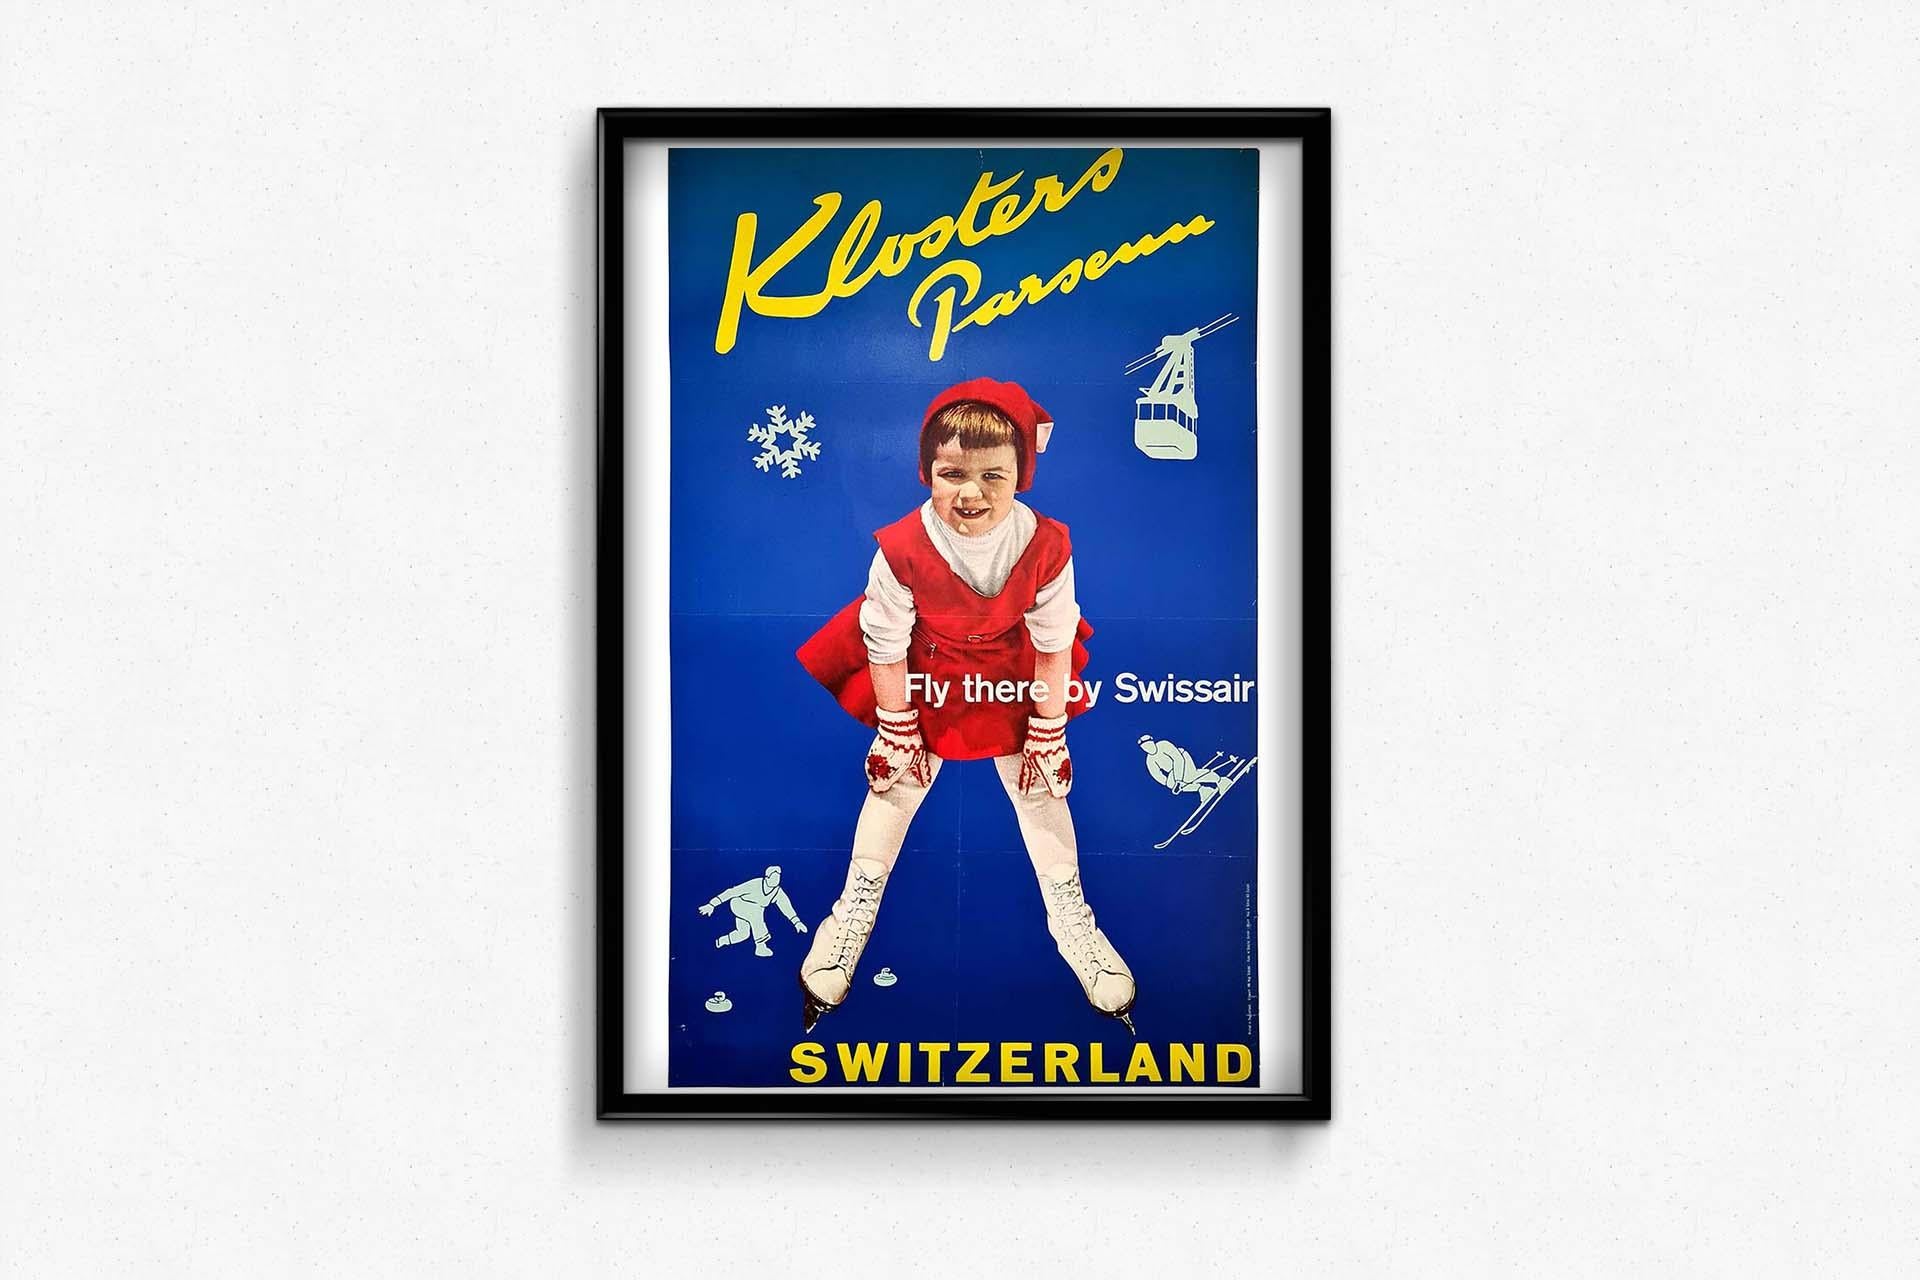 Original vintage poster for the popular Swiss alpine resort of Klosters Parsenn Suisse Schweiz featuring a colourful and fun photo of a girl wearing red and white winter clothes, leaning forward on her ice skates in front of a blue background